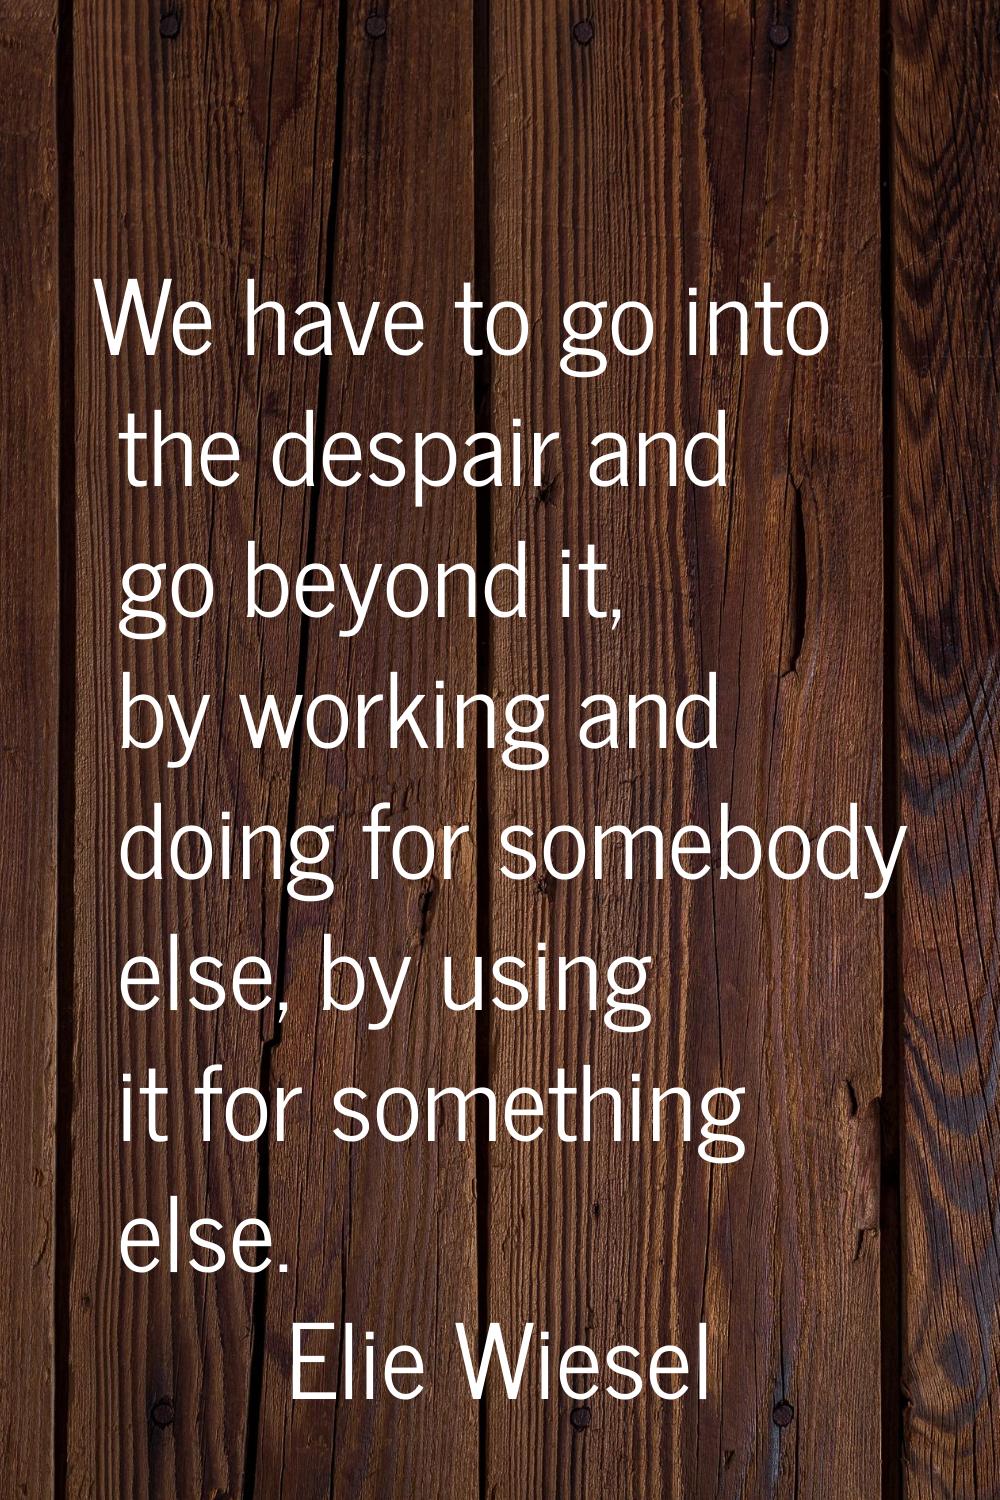 We have to go into the despair and go beyond it, by working and doing for somebody else, by using i